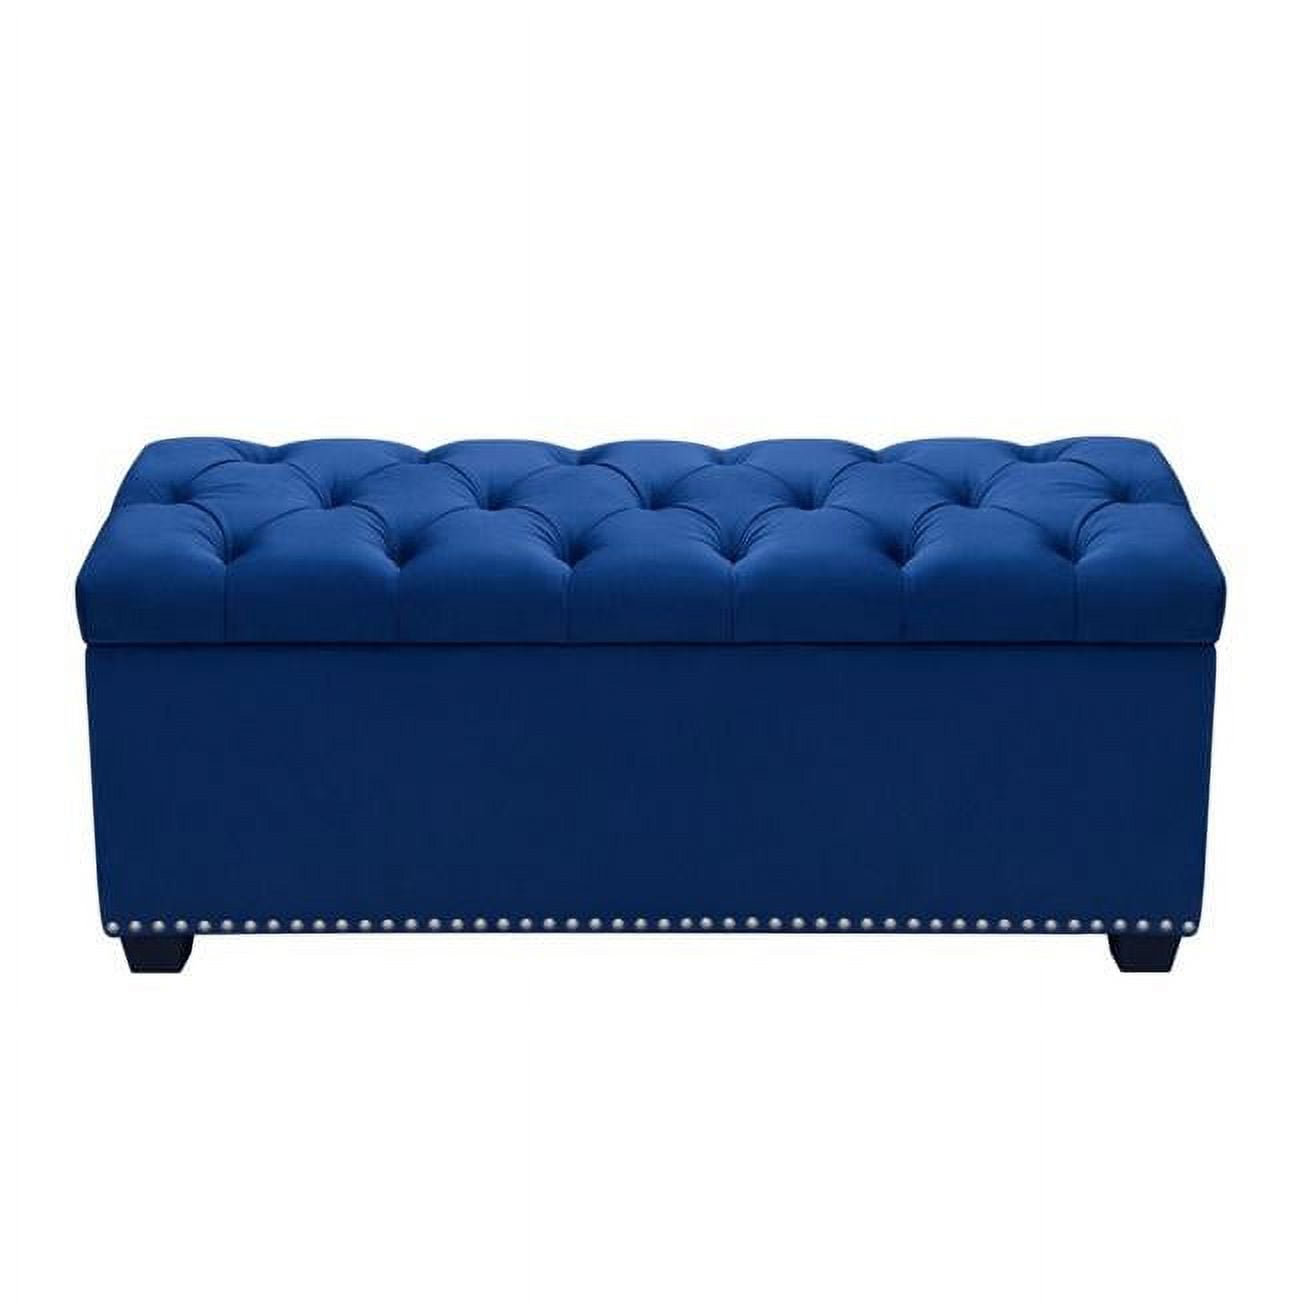 MAJESTICTRNB Majestic Tufted Velvet Lift-Top Storage Trunk with Nail Head Accent, Royal Navy Blue -  Diamond Sofa